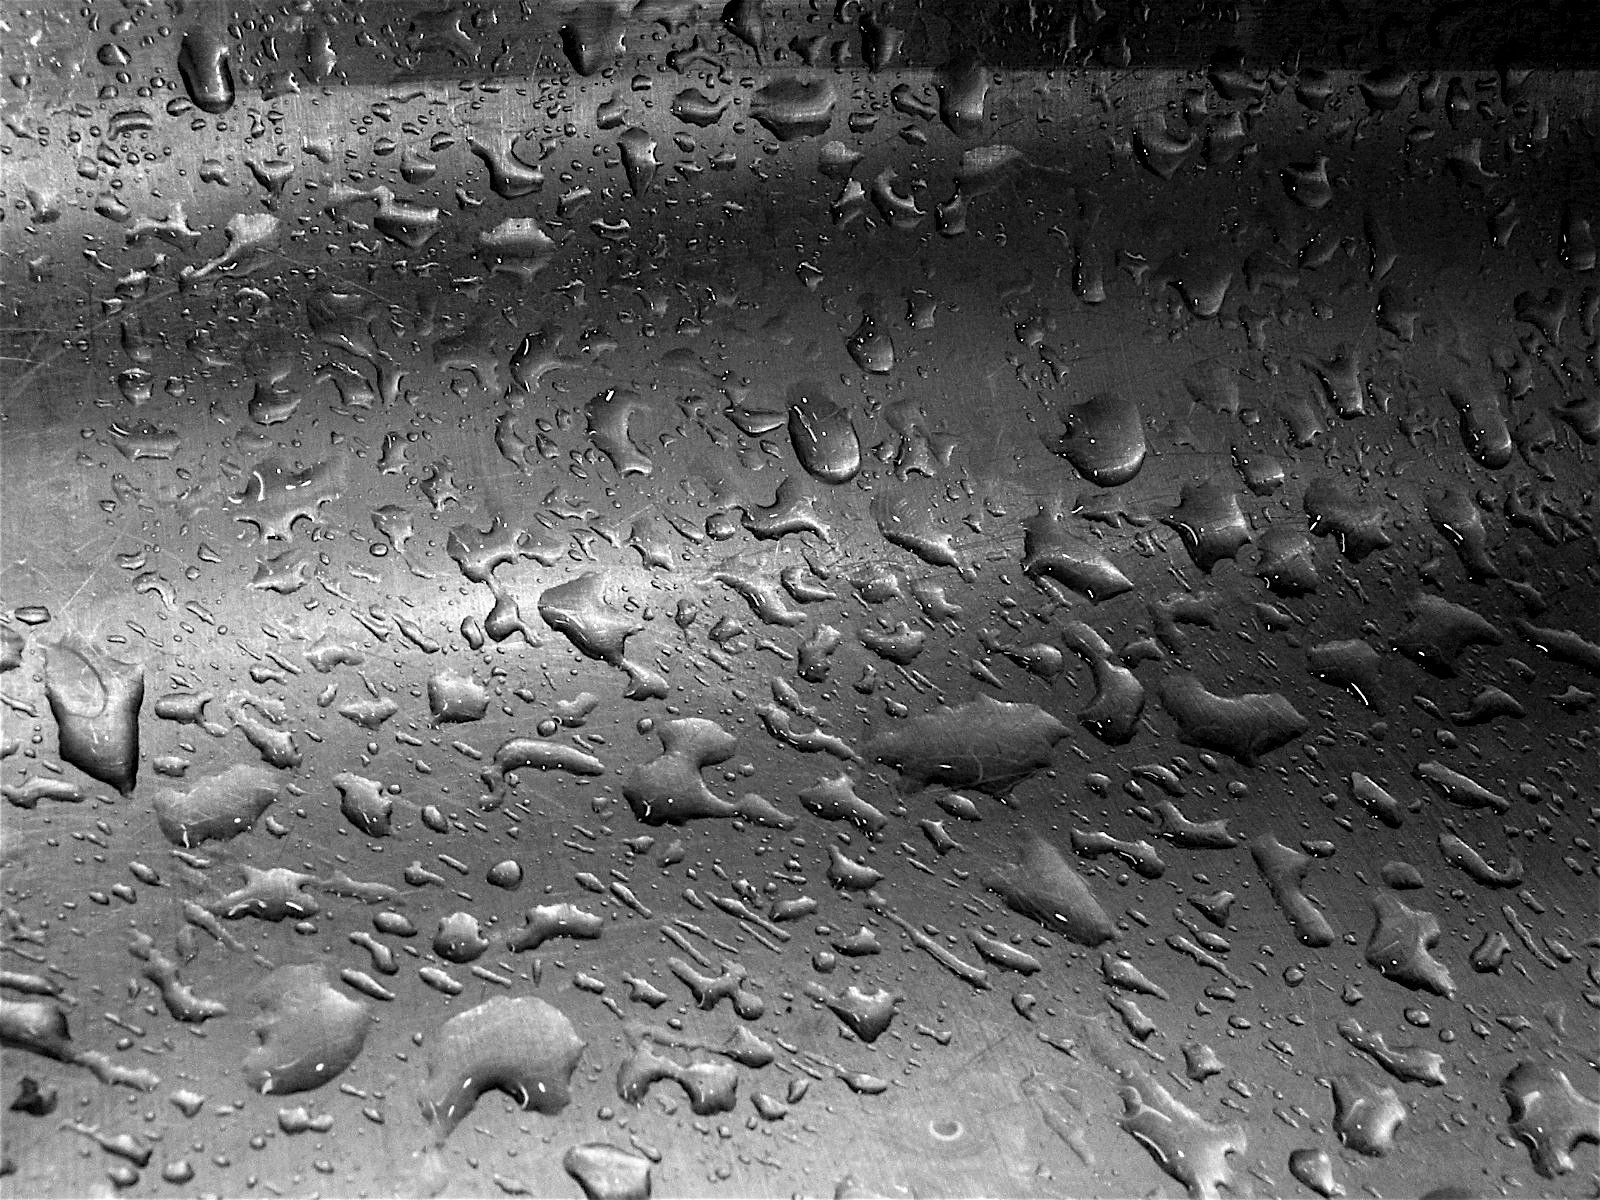 black and white pograph of water droplets on a window